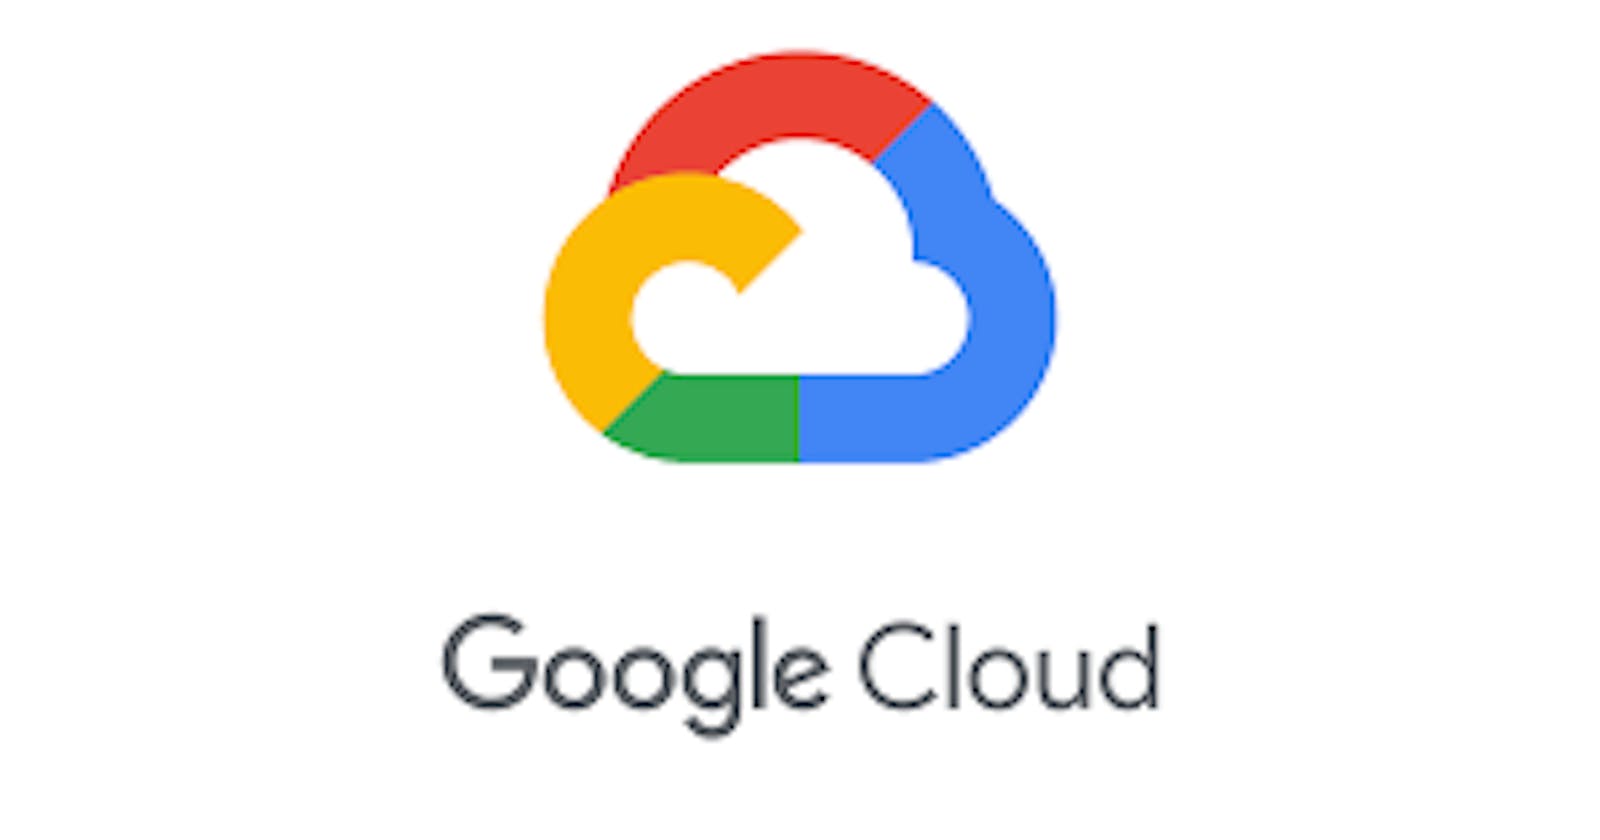 The Complete Guide to Identity and Access Management (IAM) in Google Cloud